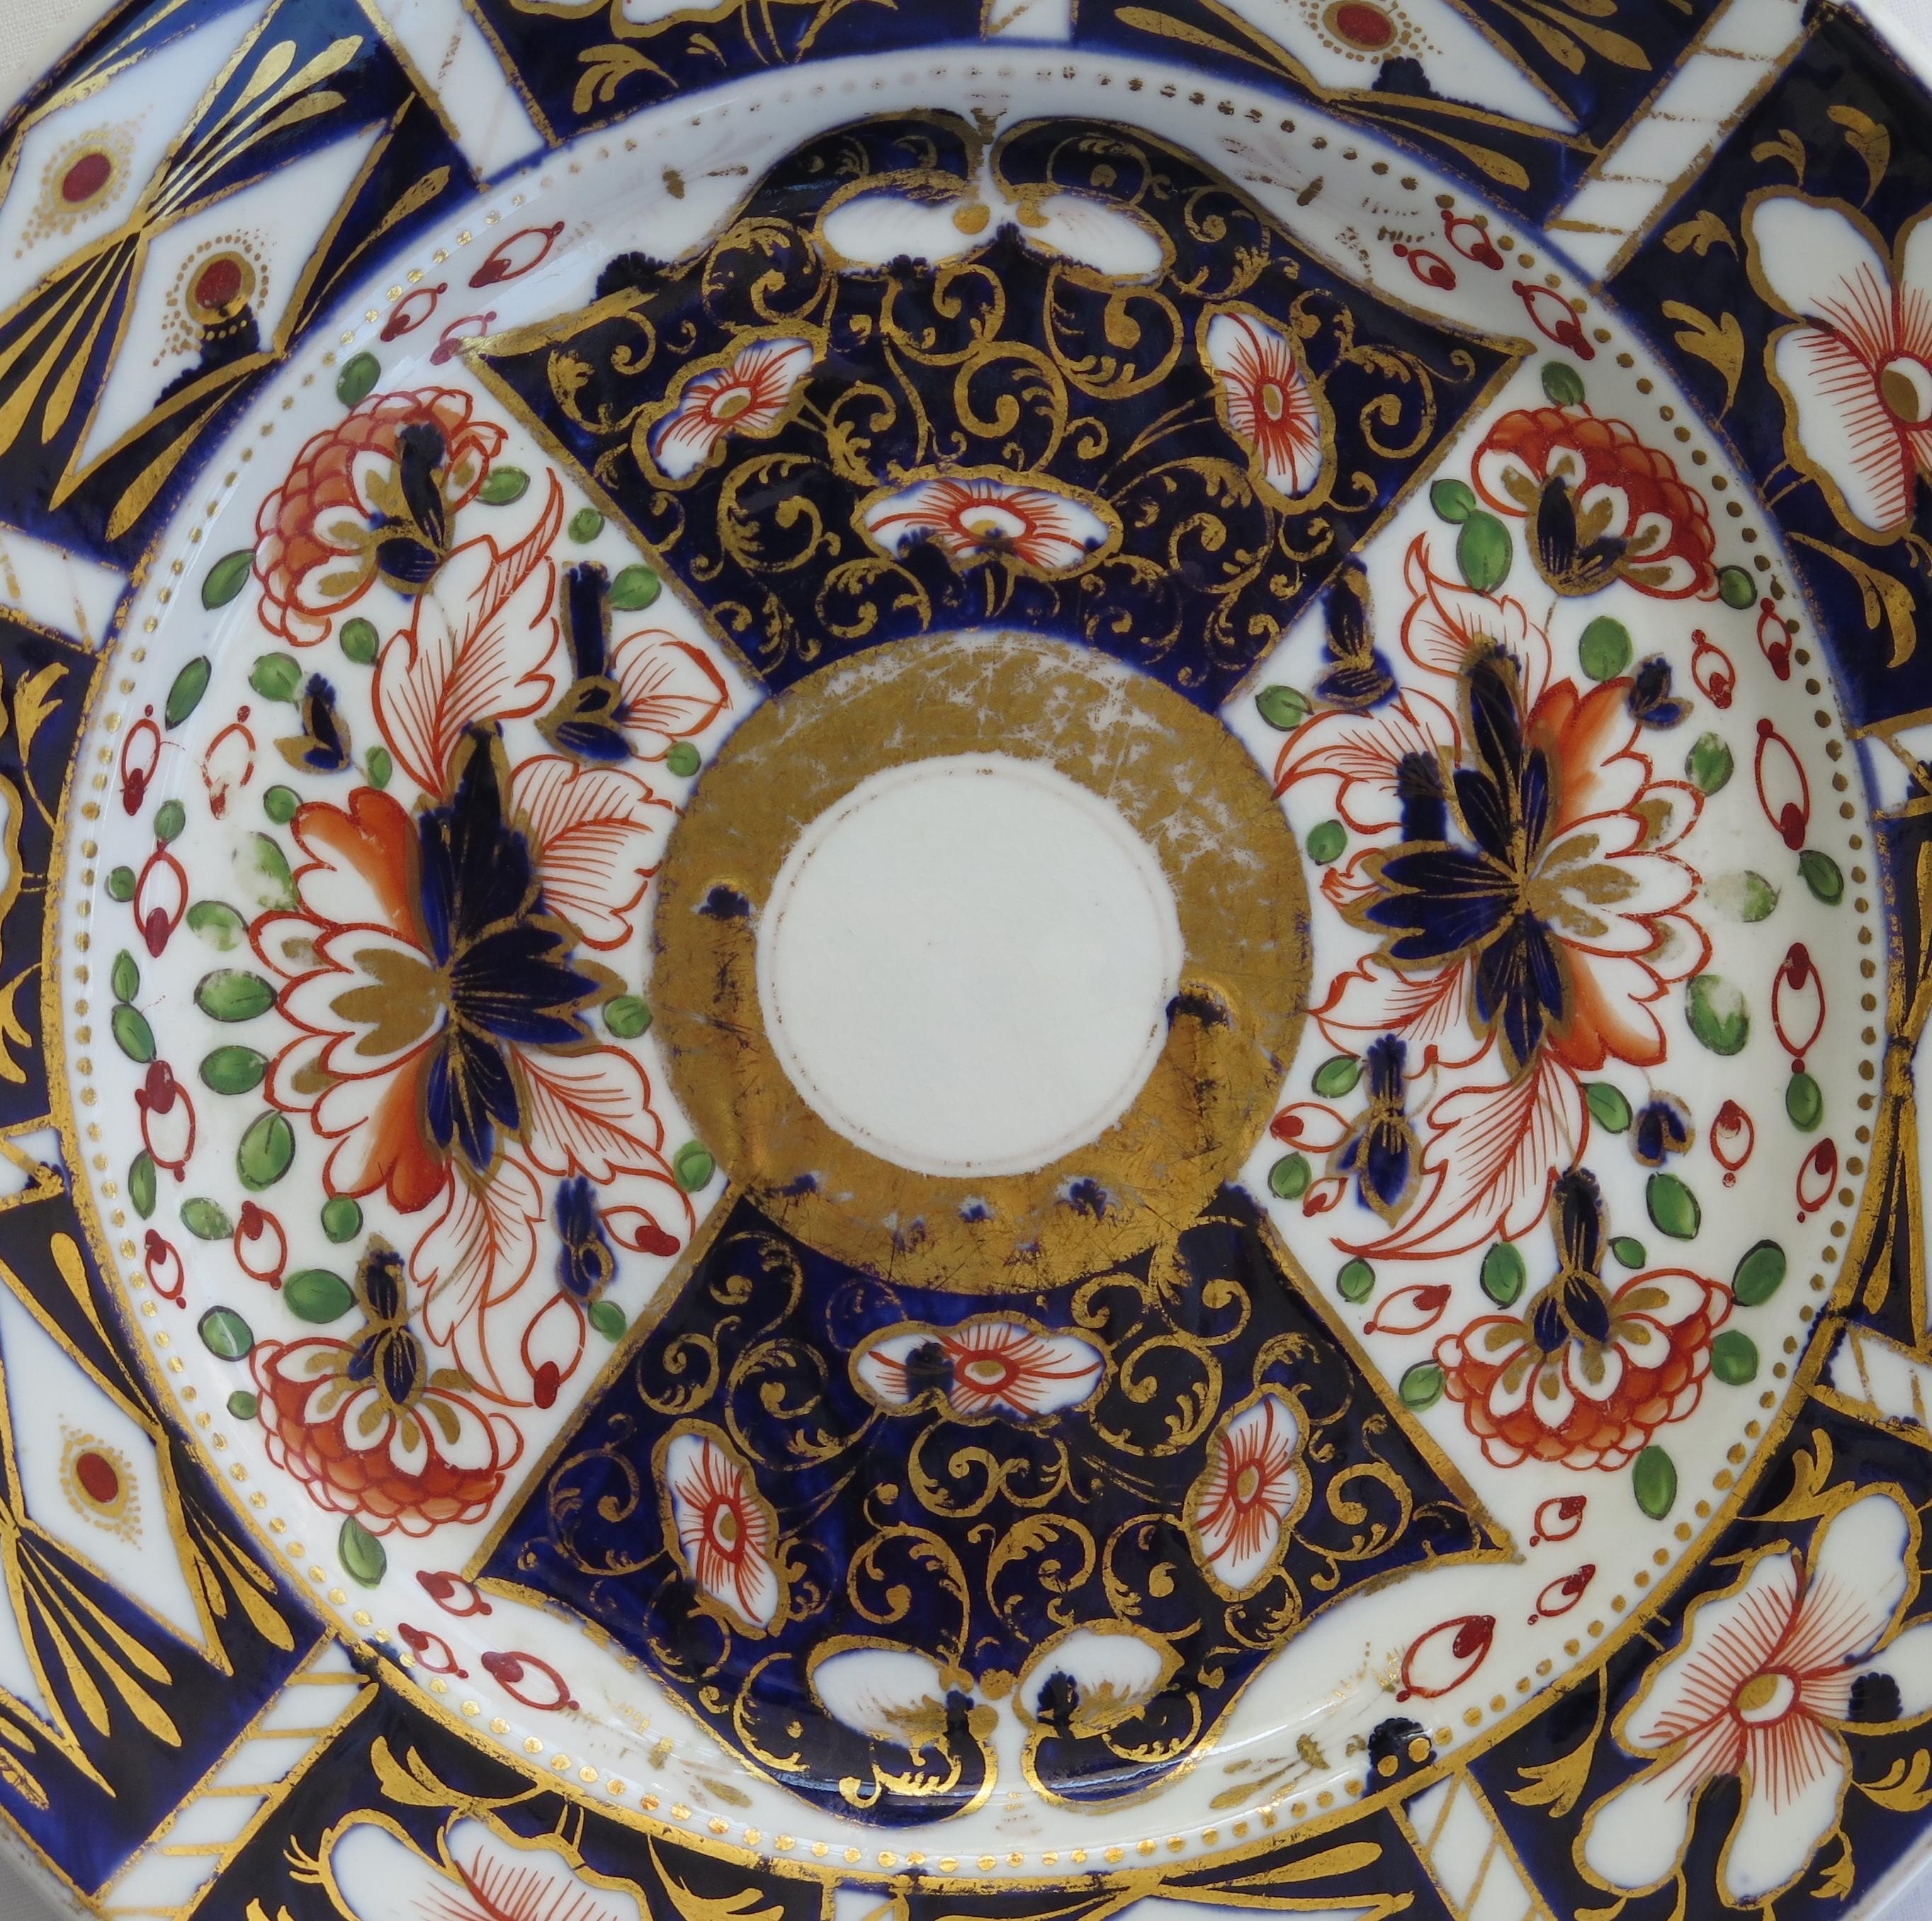 SIX Davenport Porcelain Plates Hand Painted and Gilded Pattern, Circa 1870 For Sale 7